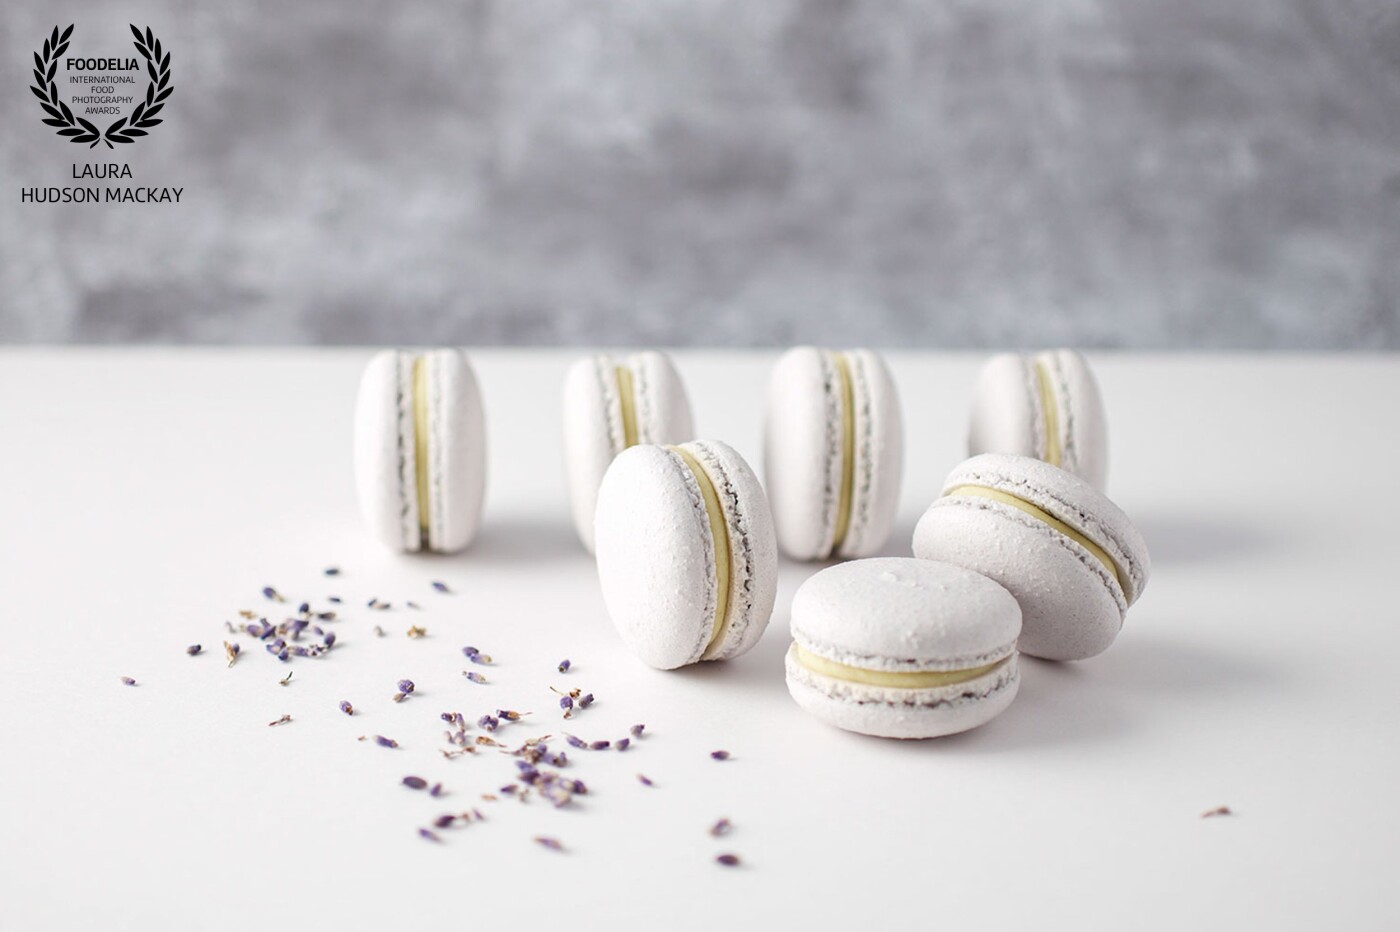 Beautiful and delicately flavoured Lavender and Gooseberry macarons, made using the traditional French meringue method, creating the perfect texture, crisp on the outside and chewy on the inside. Wonderful to photograph and absolutely delicious!